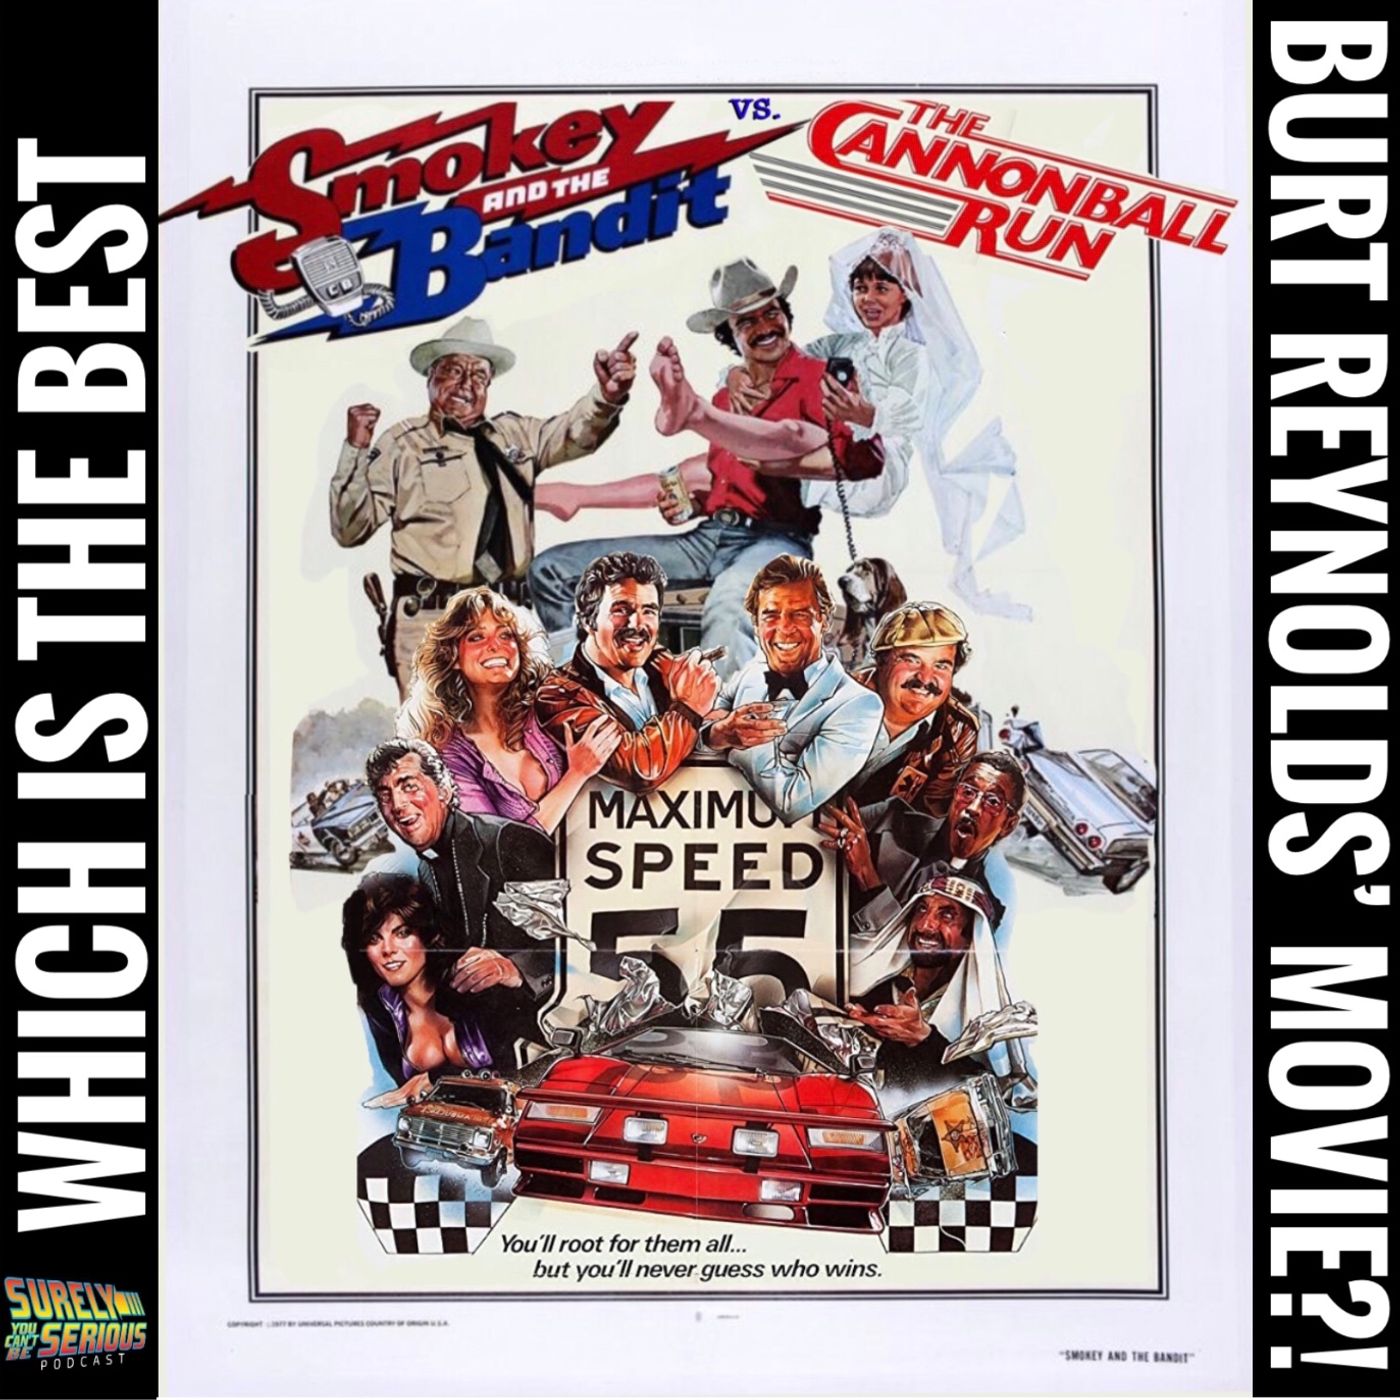 Smokey and the Bandit ('77) vs Cannonball Run ('81) - Which is Burt Reynolds' Best?